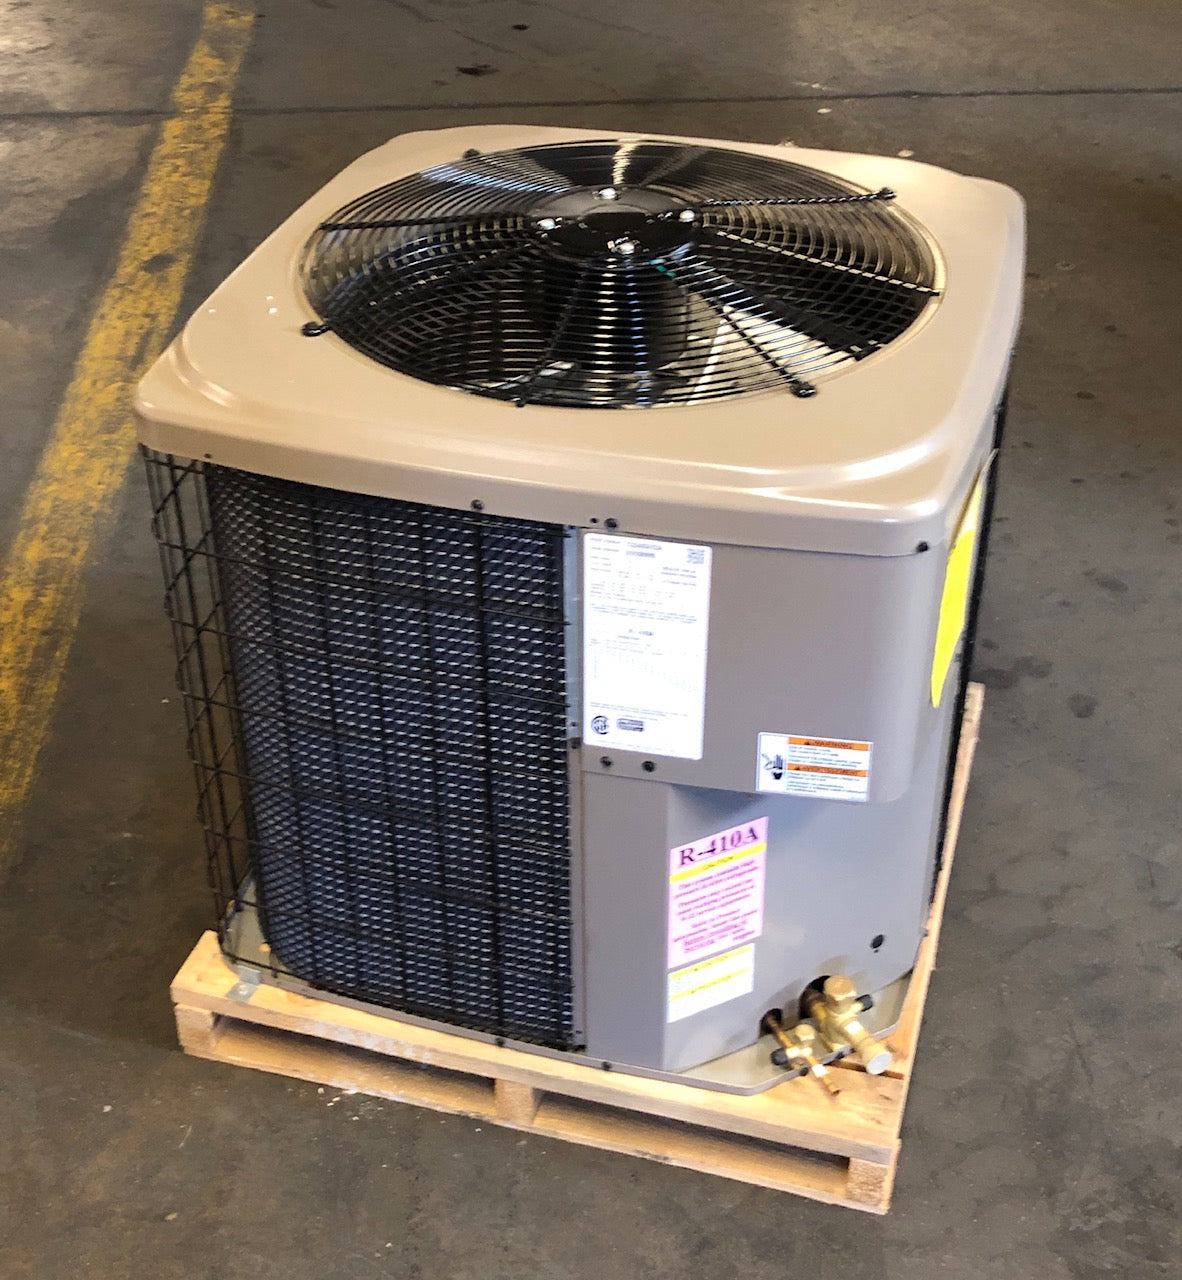 4 TON SPLIT SYSTEM AIR CONDITIONER, 13 SEER 208-230/60/1 R-410A